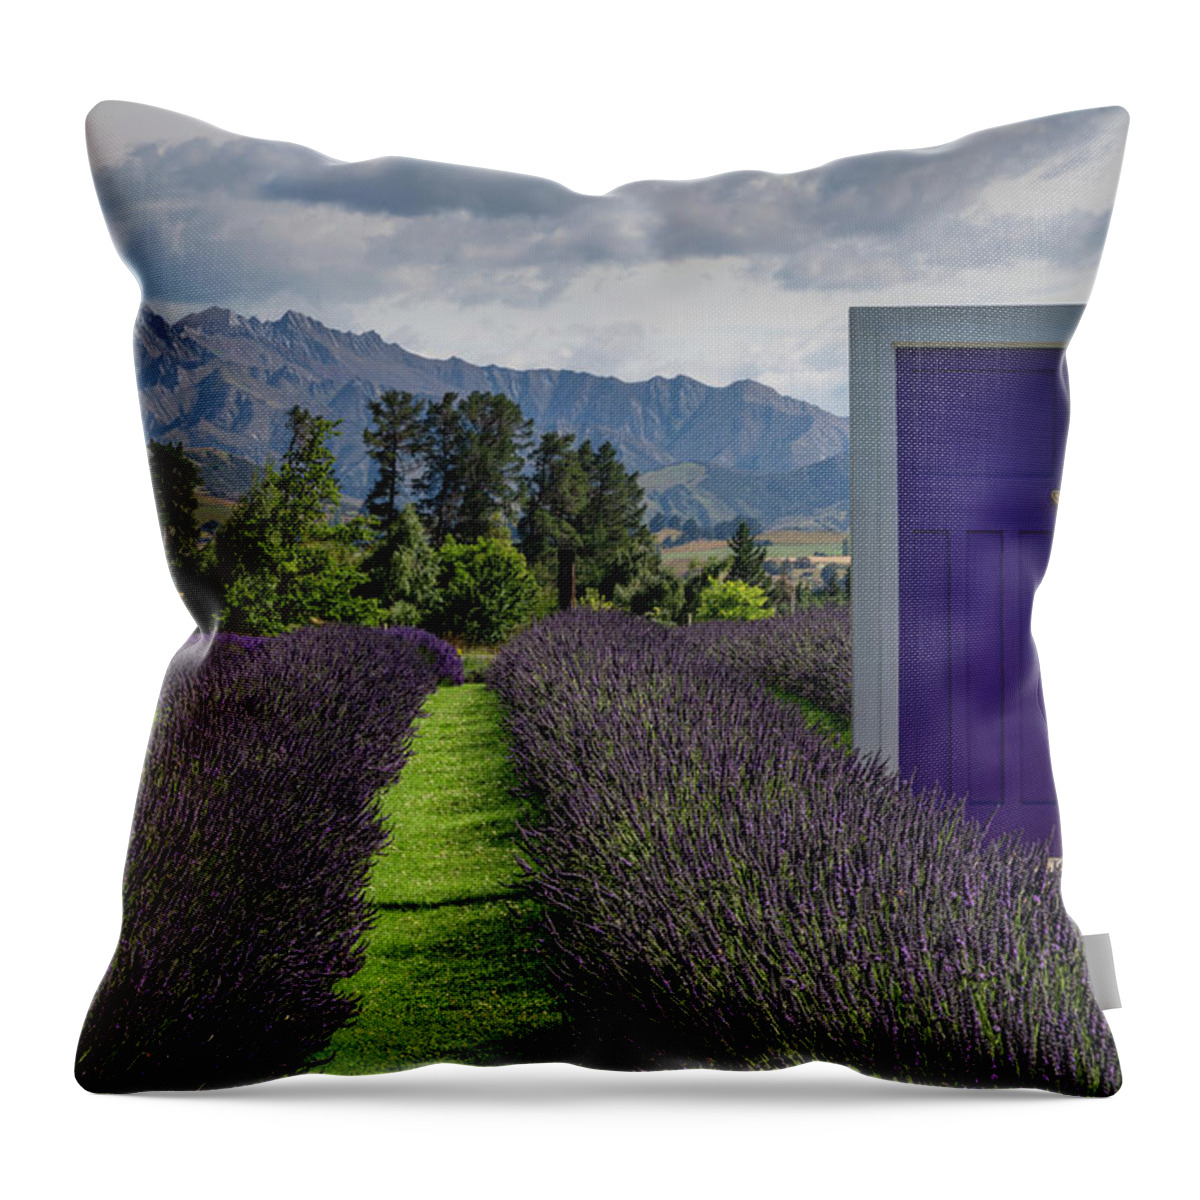 Beautiful Throw Pillow featuring the photograph The purple door on the Lavender Farm in Wanaka with the mountains in the background by Anges Van der Logt